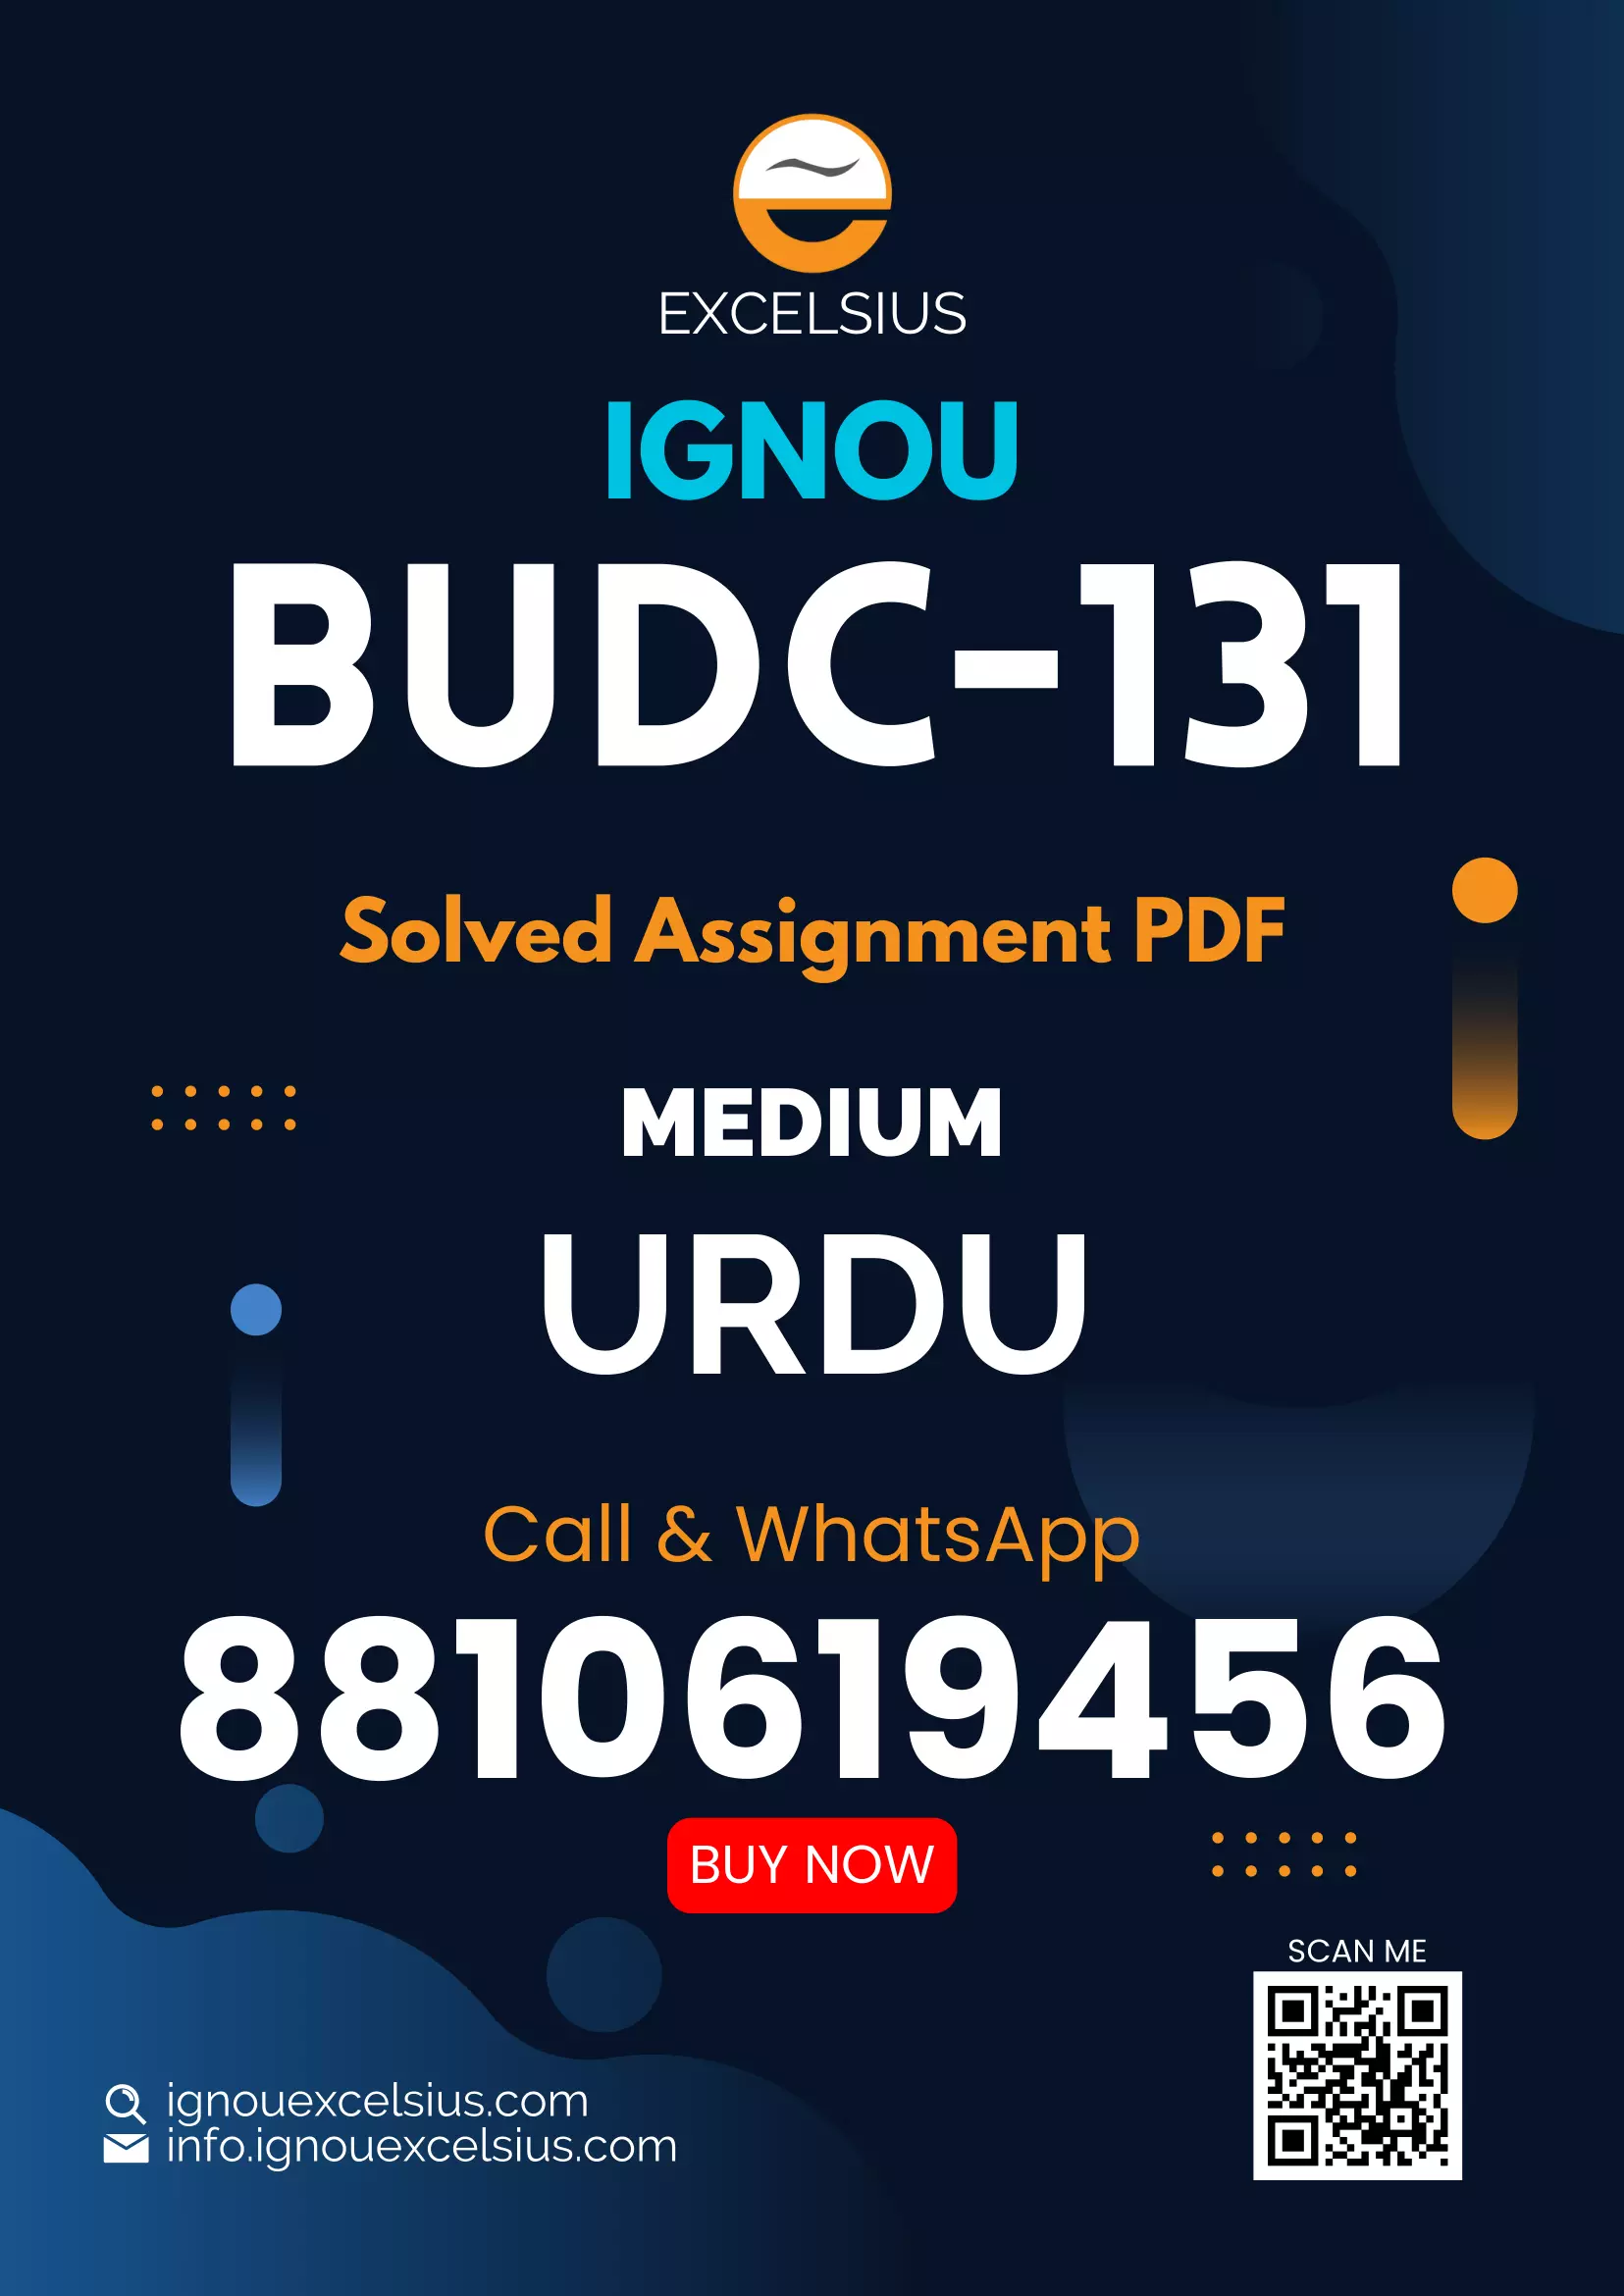 IGNOU BUDC-131 - Study of Prose and Poetic form in Urdu Literature, Latest Solved Assignment-July 2022 - January 2023